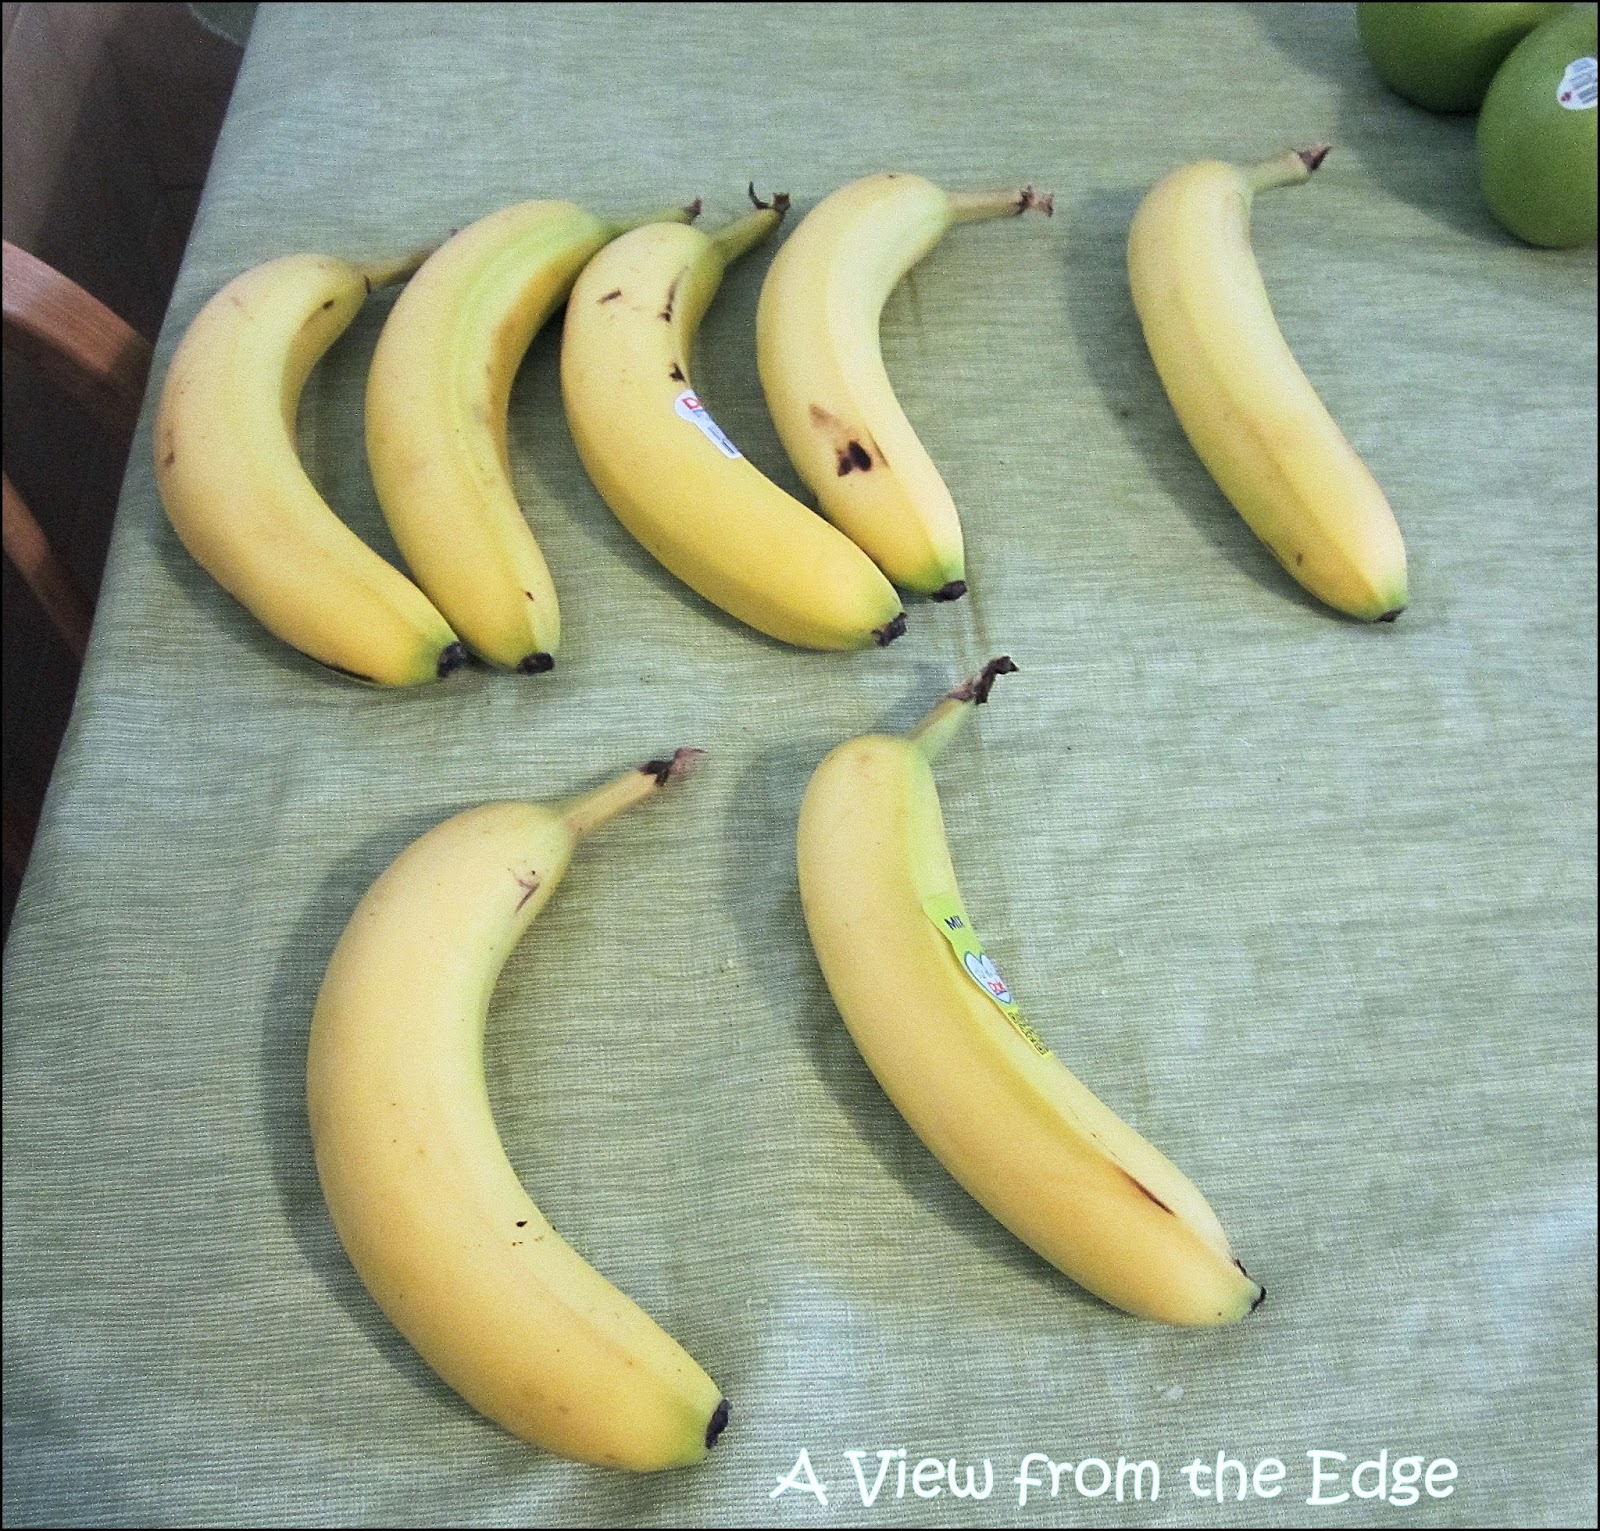 A View from the Edge: Going Bananas